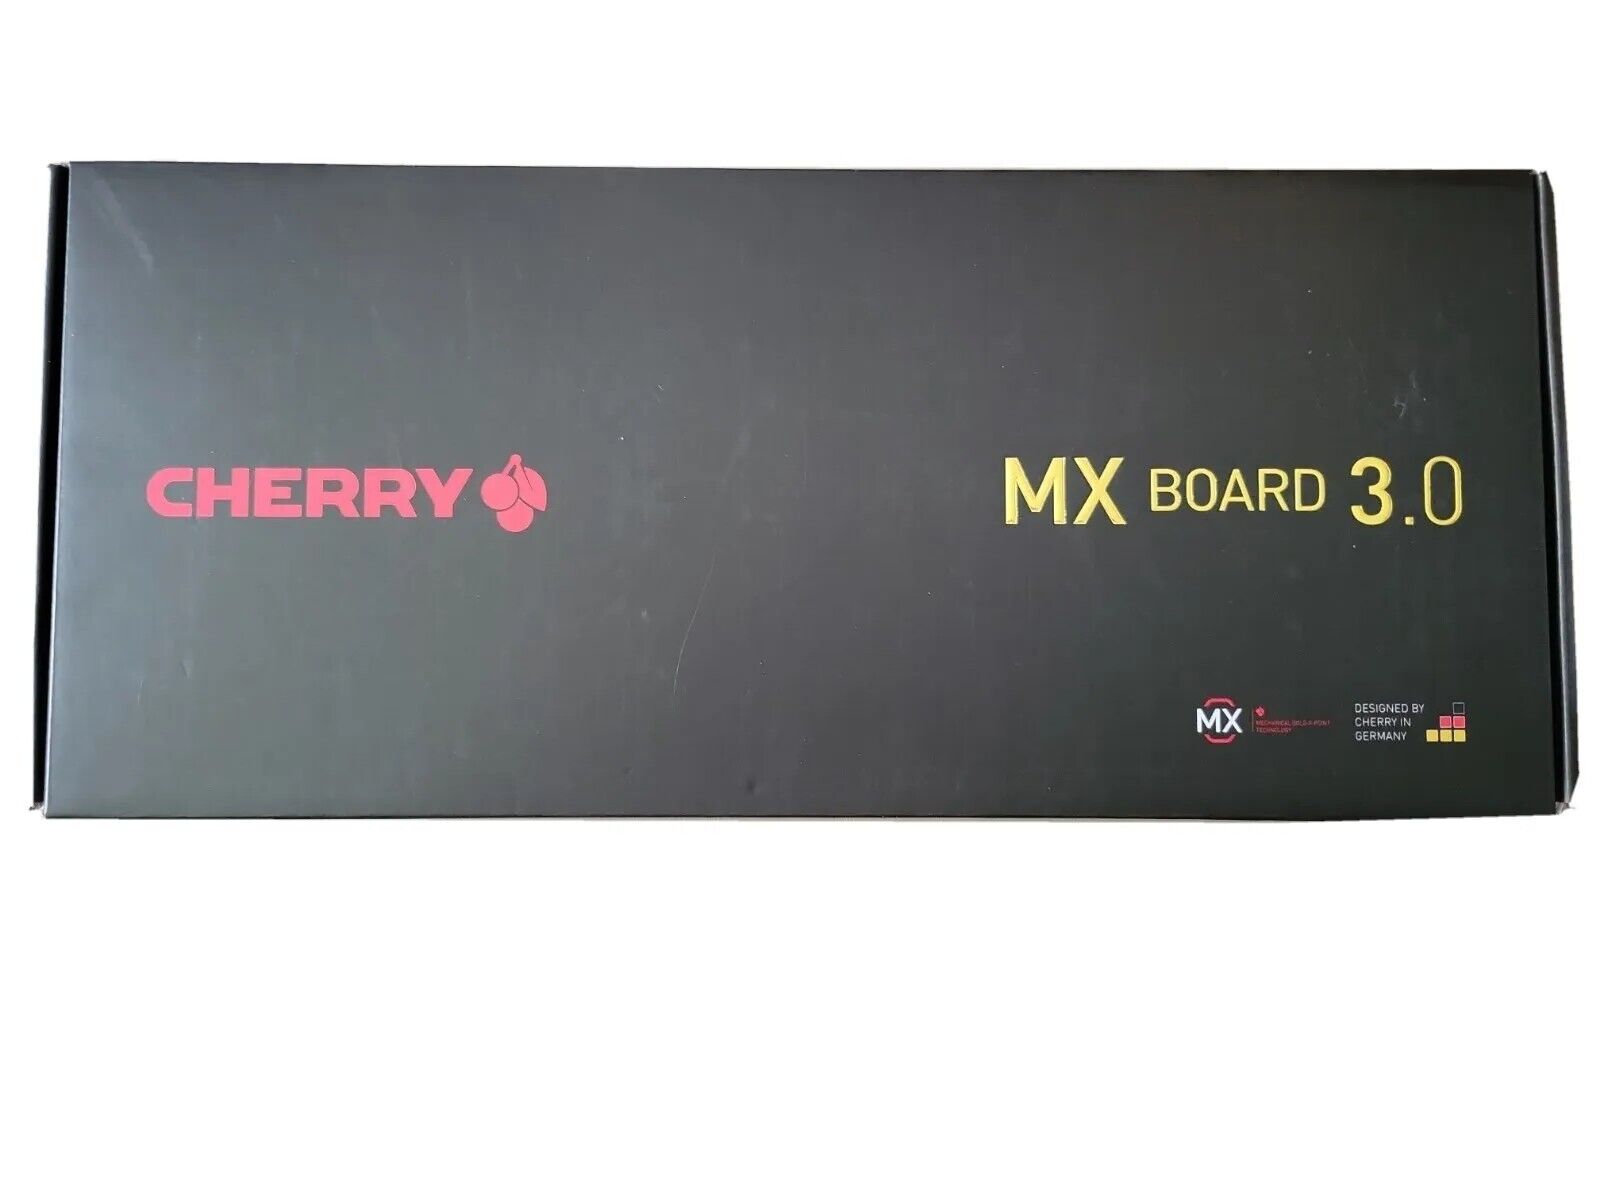 Cherry MX Board 3.0 MX 3850 USB RED 45 cN LINEAR QWERTY Keyboard, NEVER OPENED